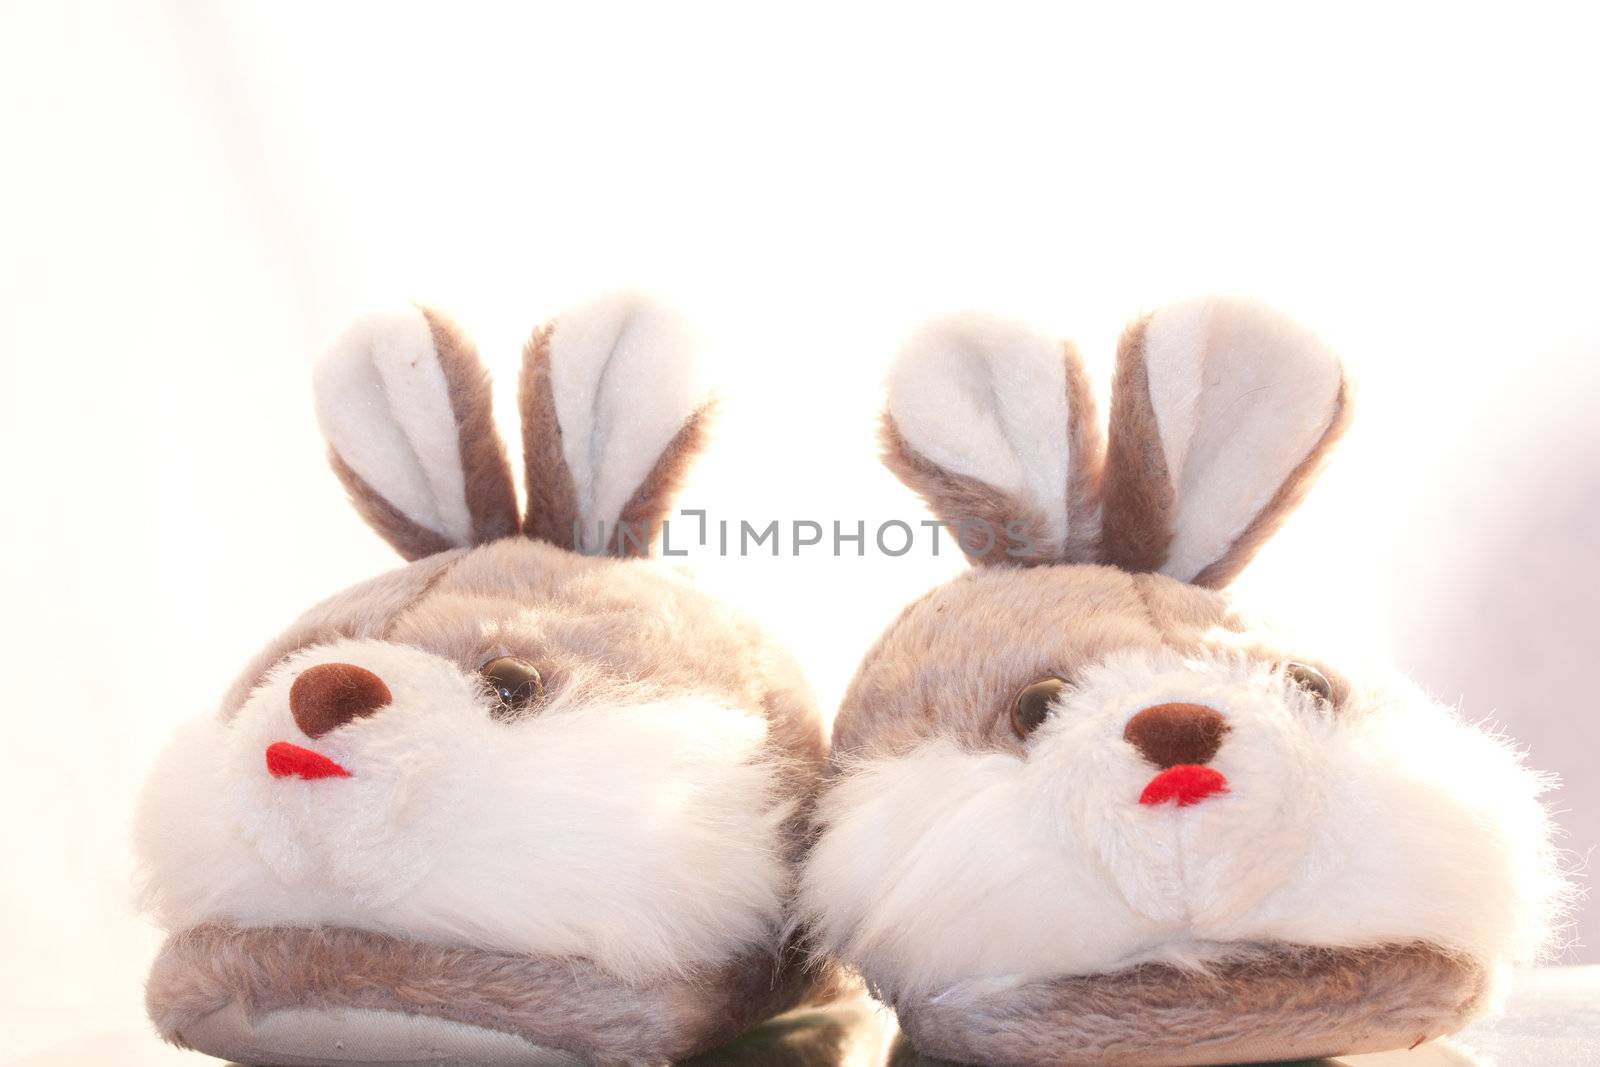 Slippers hare  on a white background